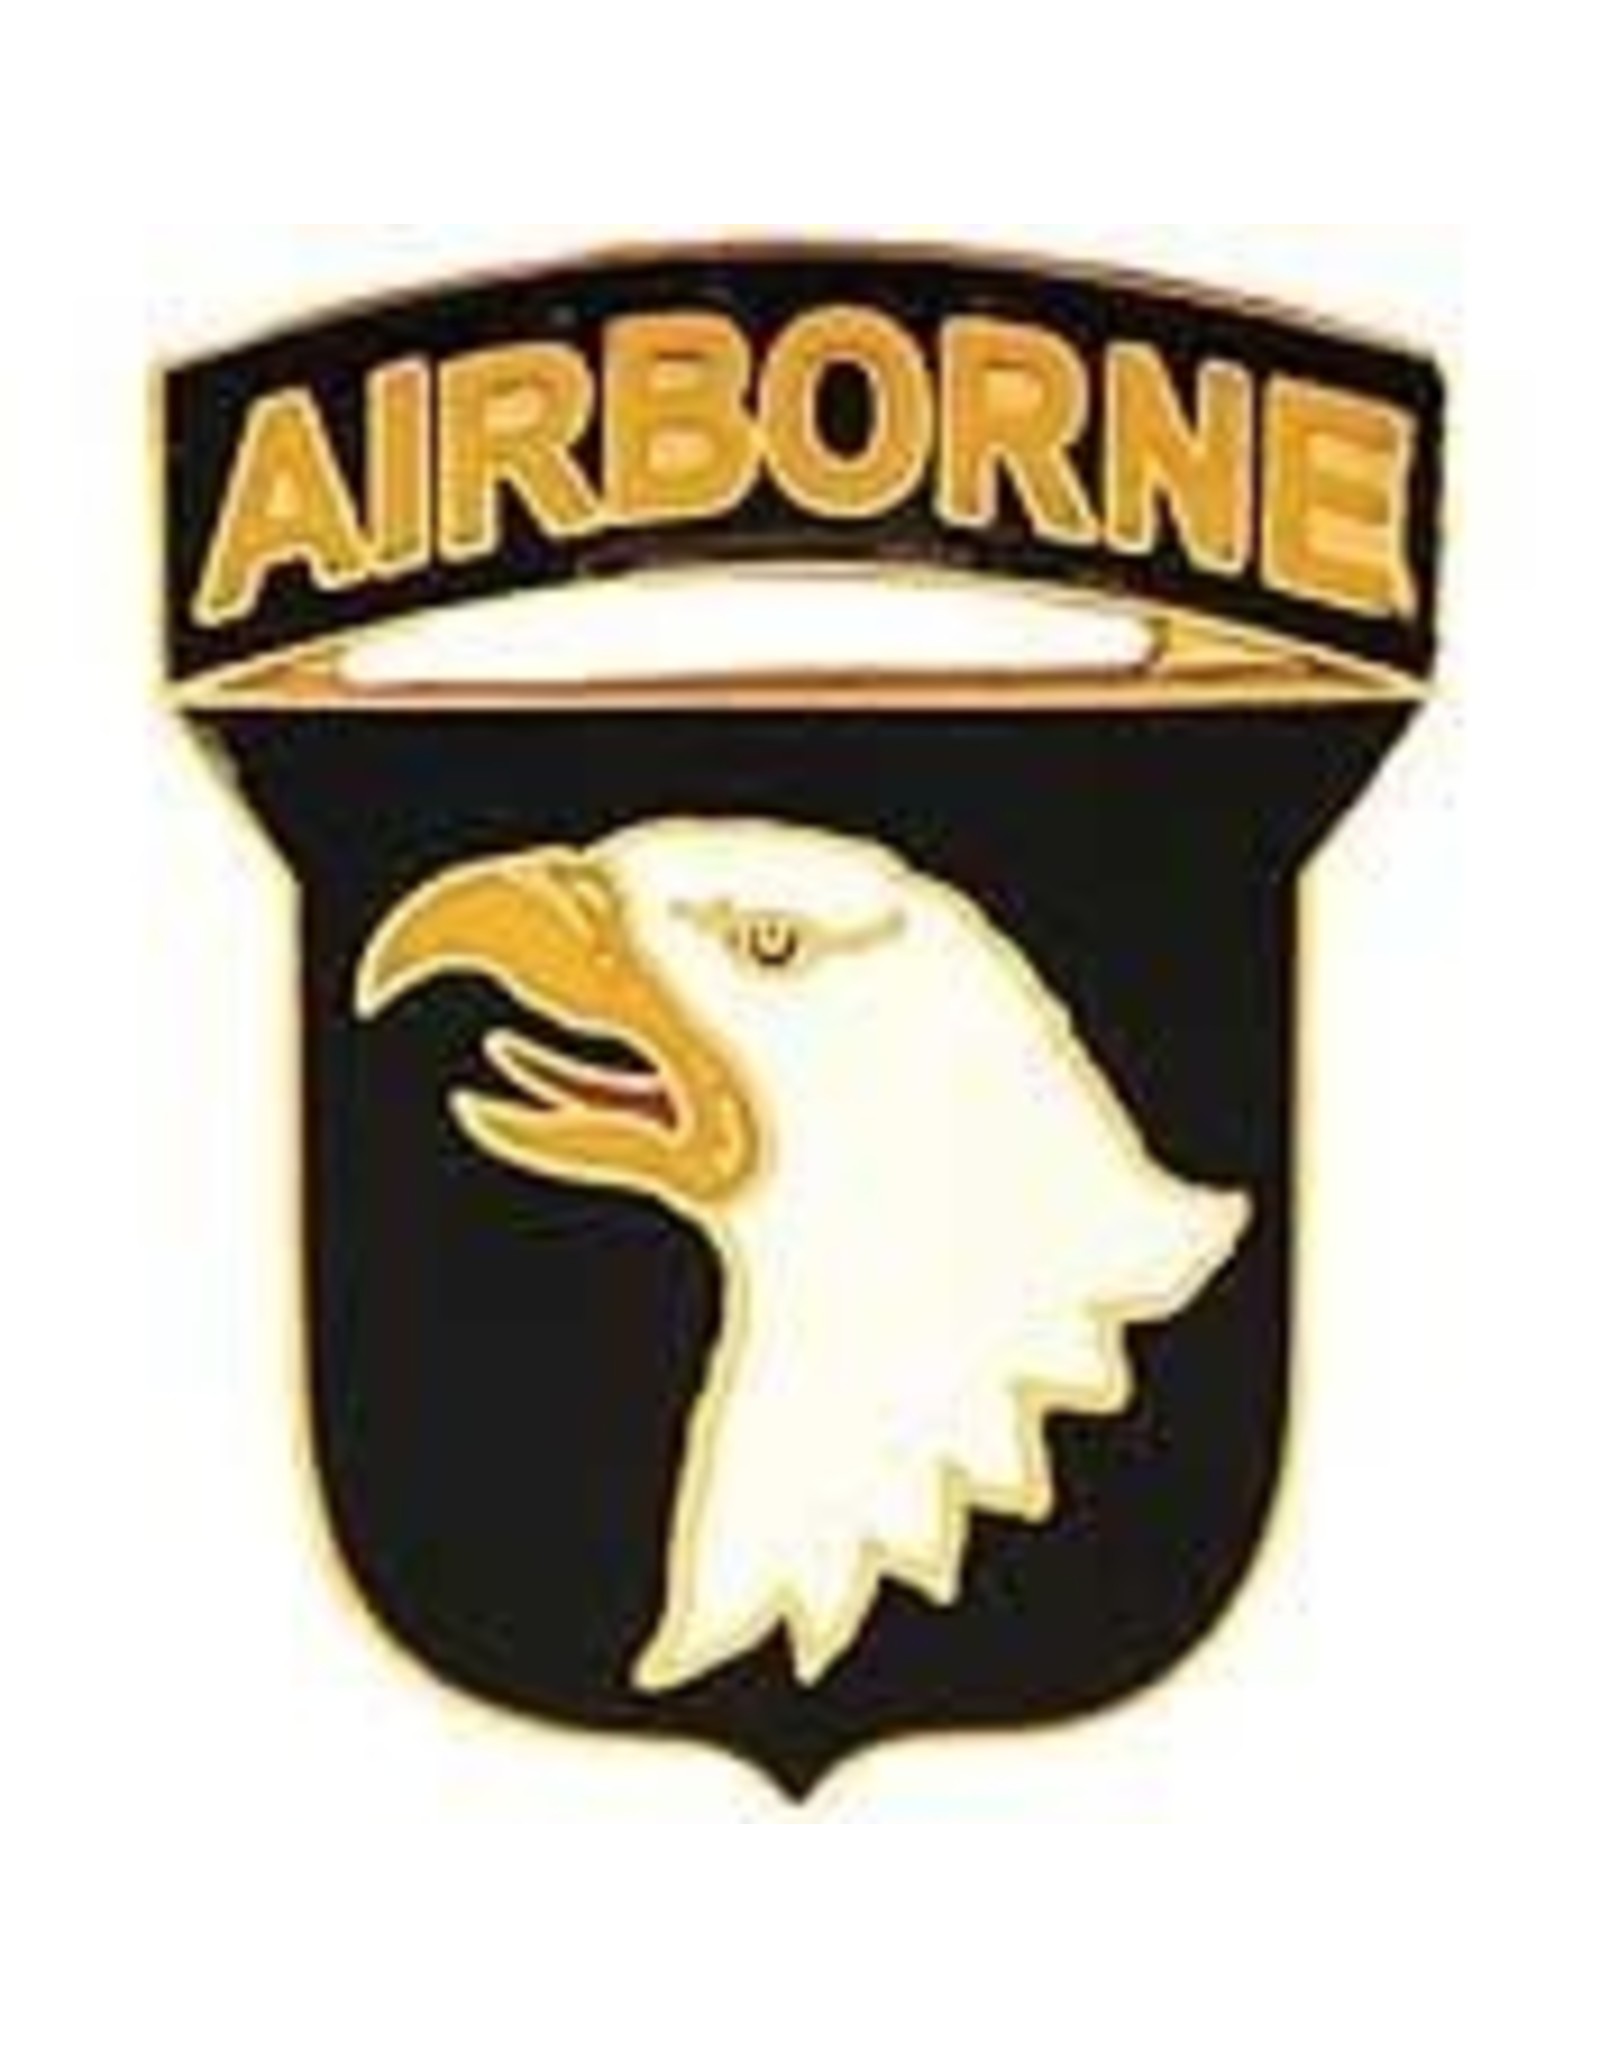 Pin - Army 101st Airborne Division